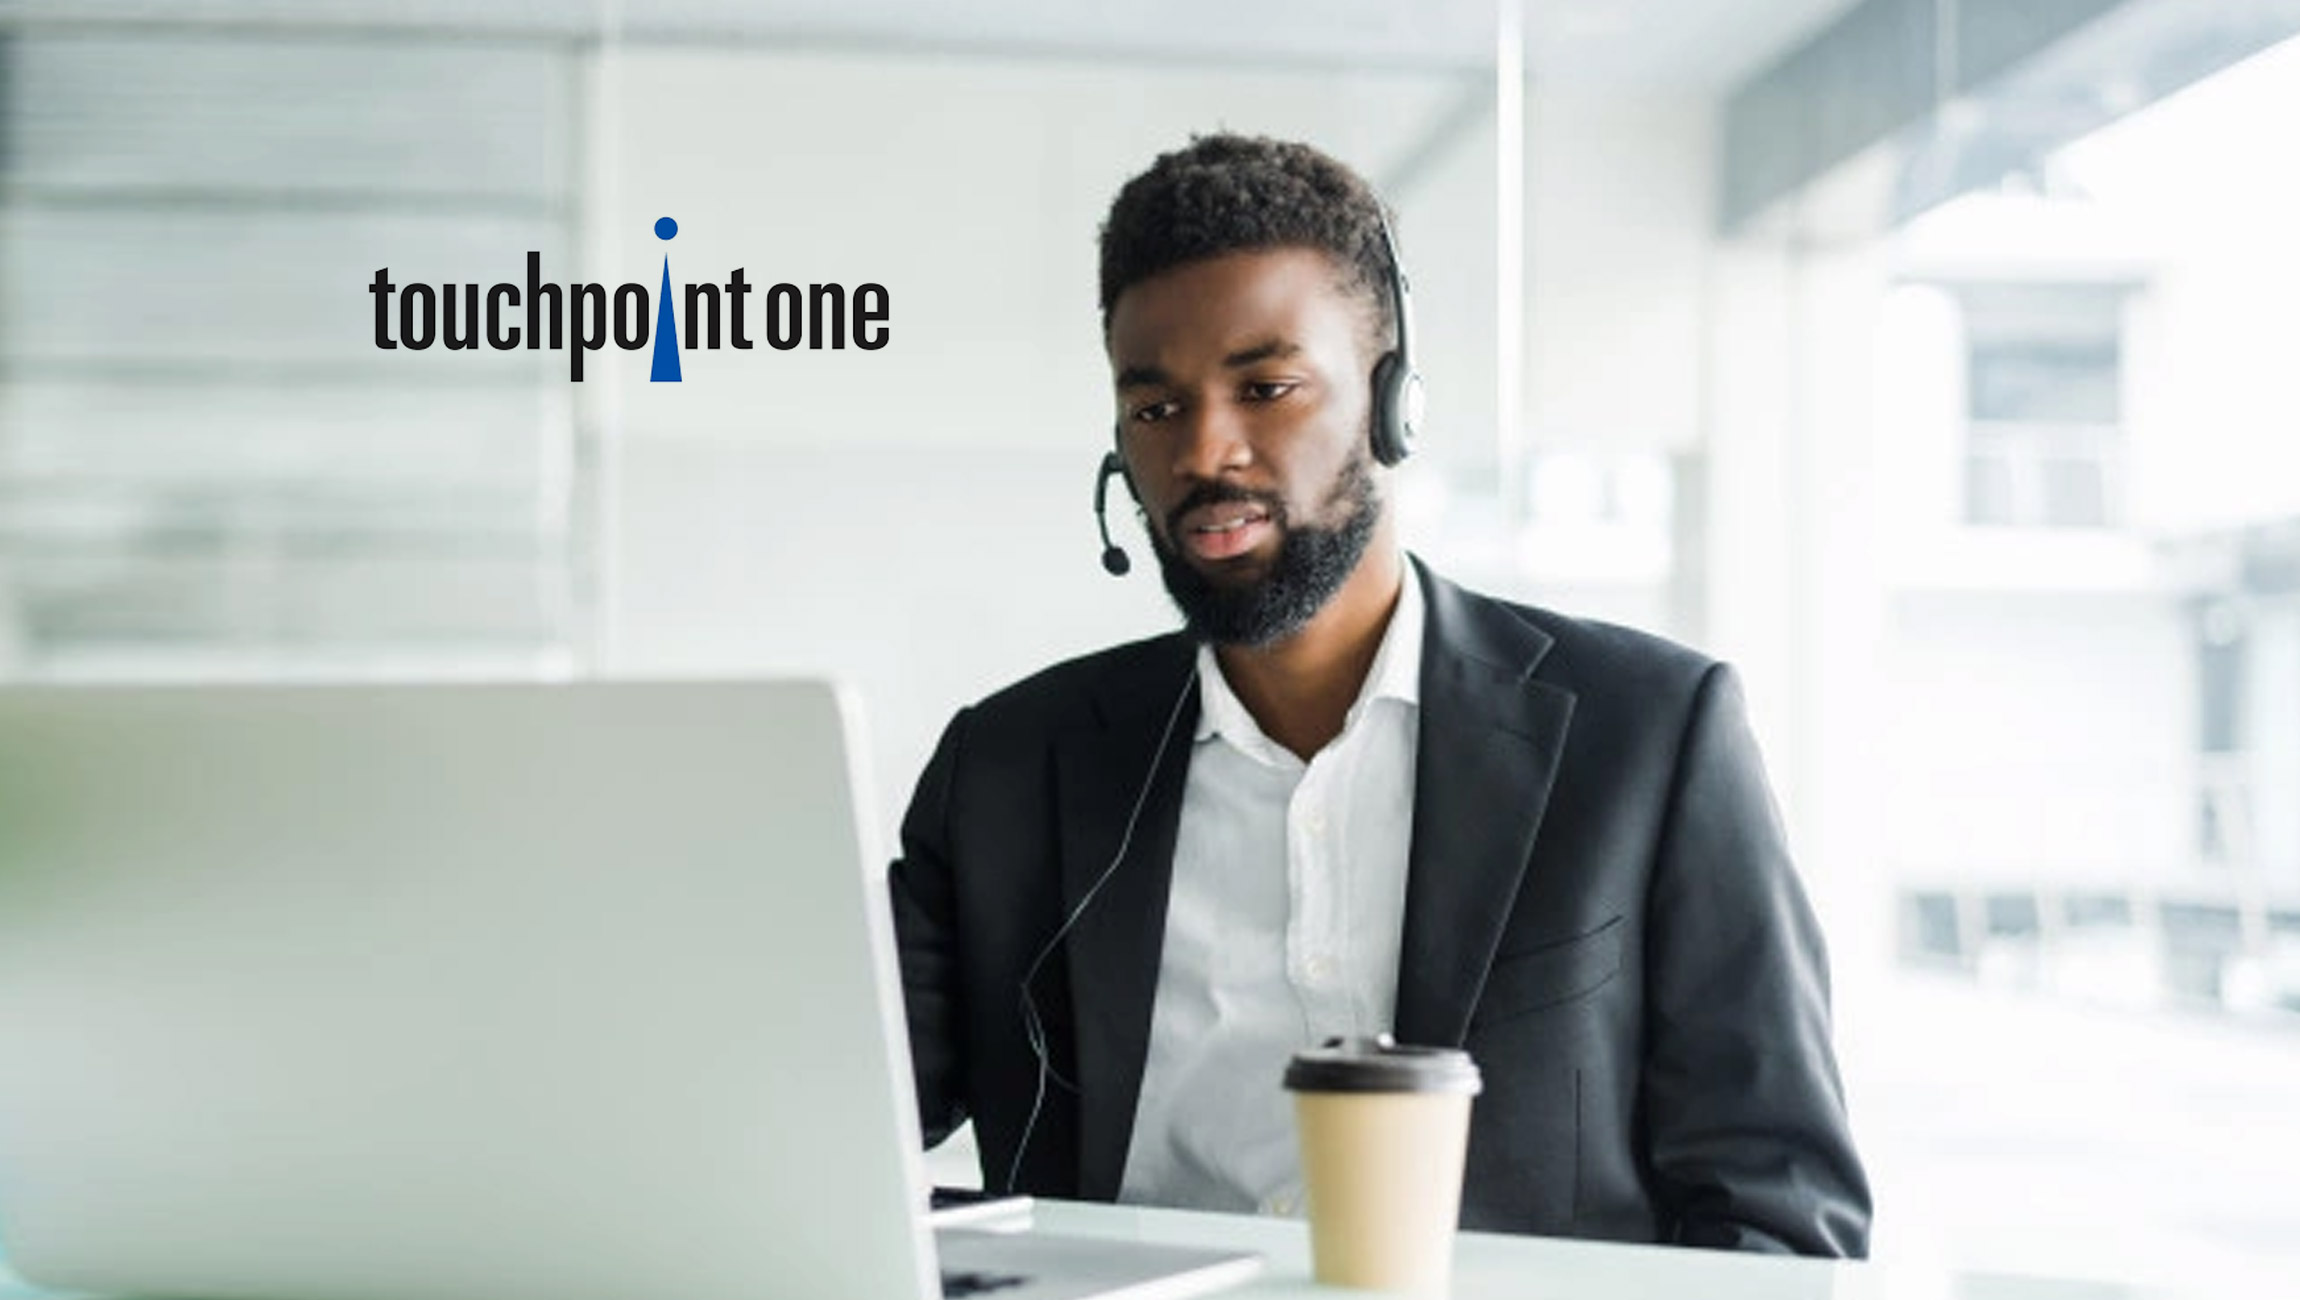 TouchPoint One Performance Management Platform Offers New Agent Coaching, Gamification, Dashboard, and QA Features to Strengthen Virtual/Hybrid Customer Contact Teams